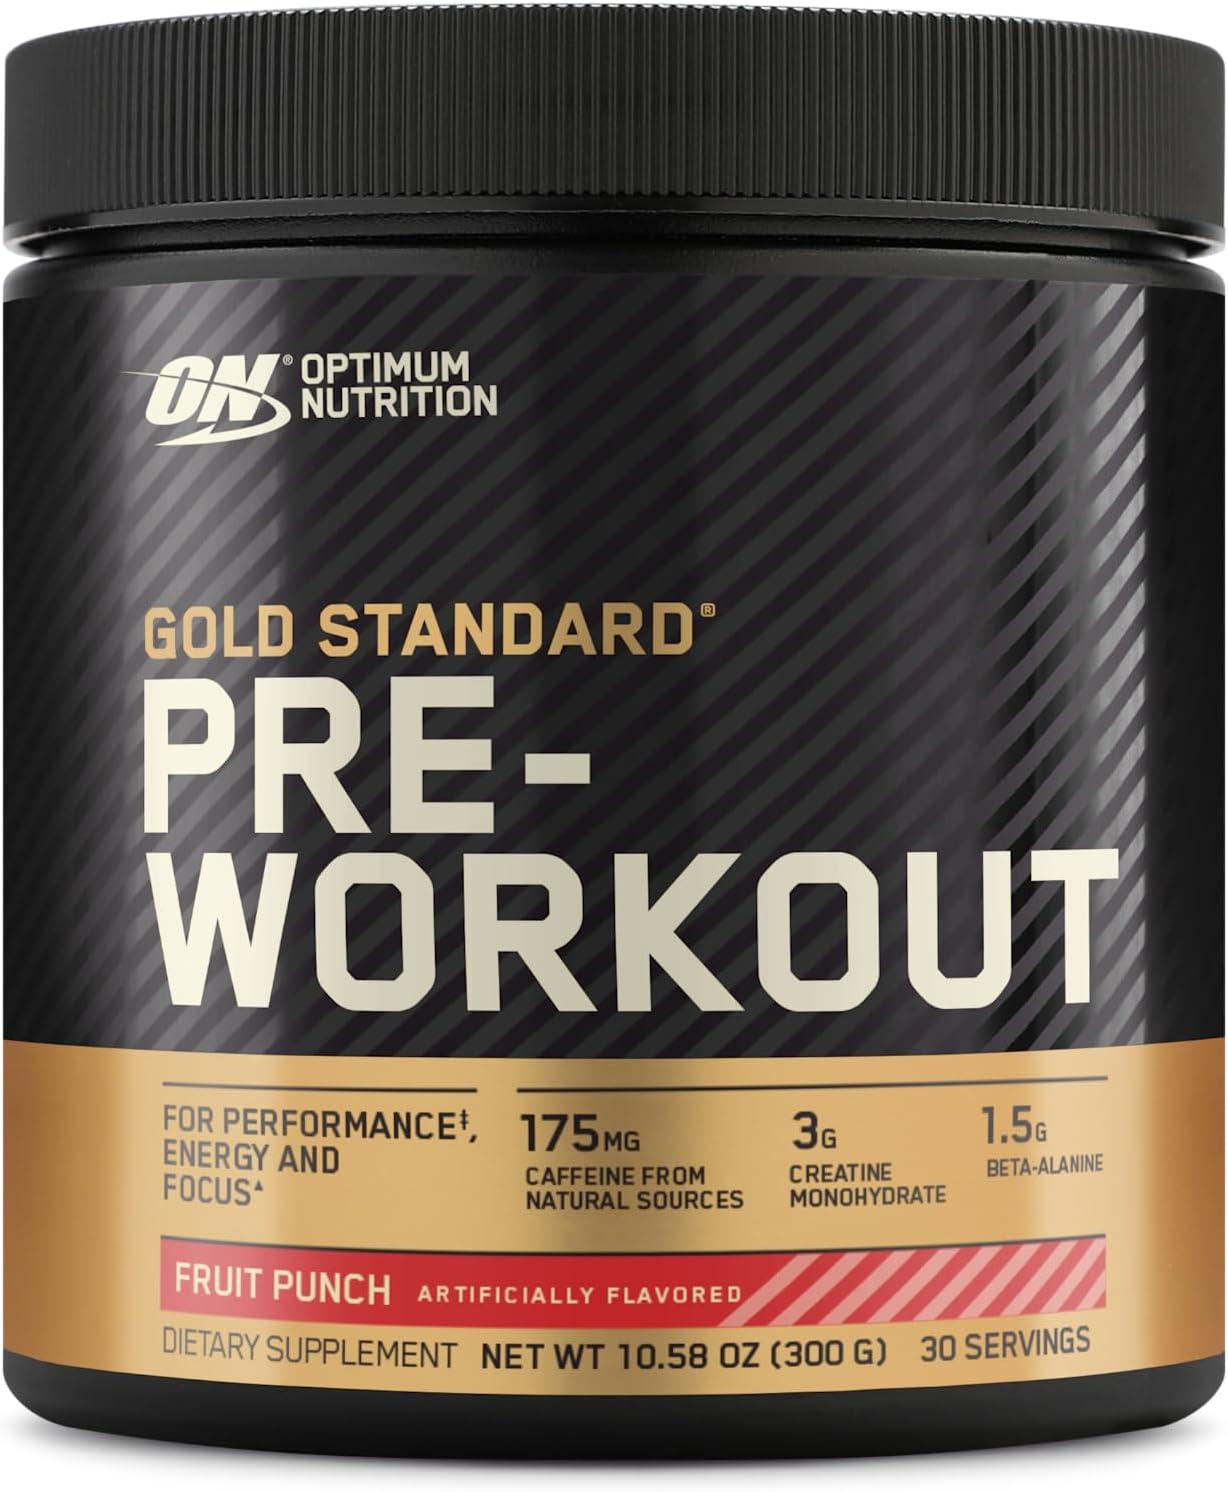 OPTIMUM NUTRITION Gold Standard Pre-Workout with Creatine, Beta-Alanin